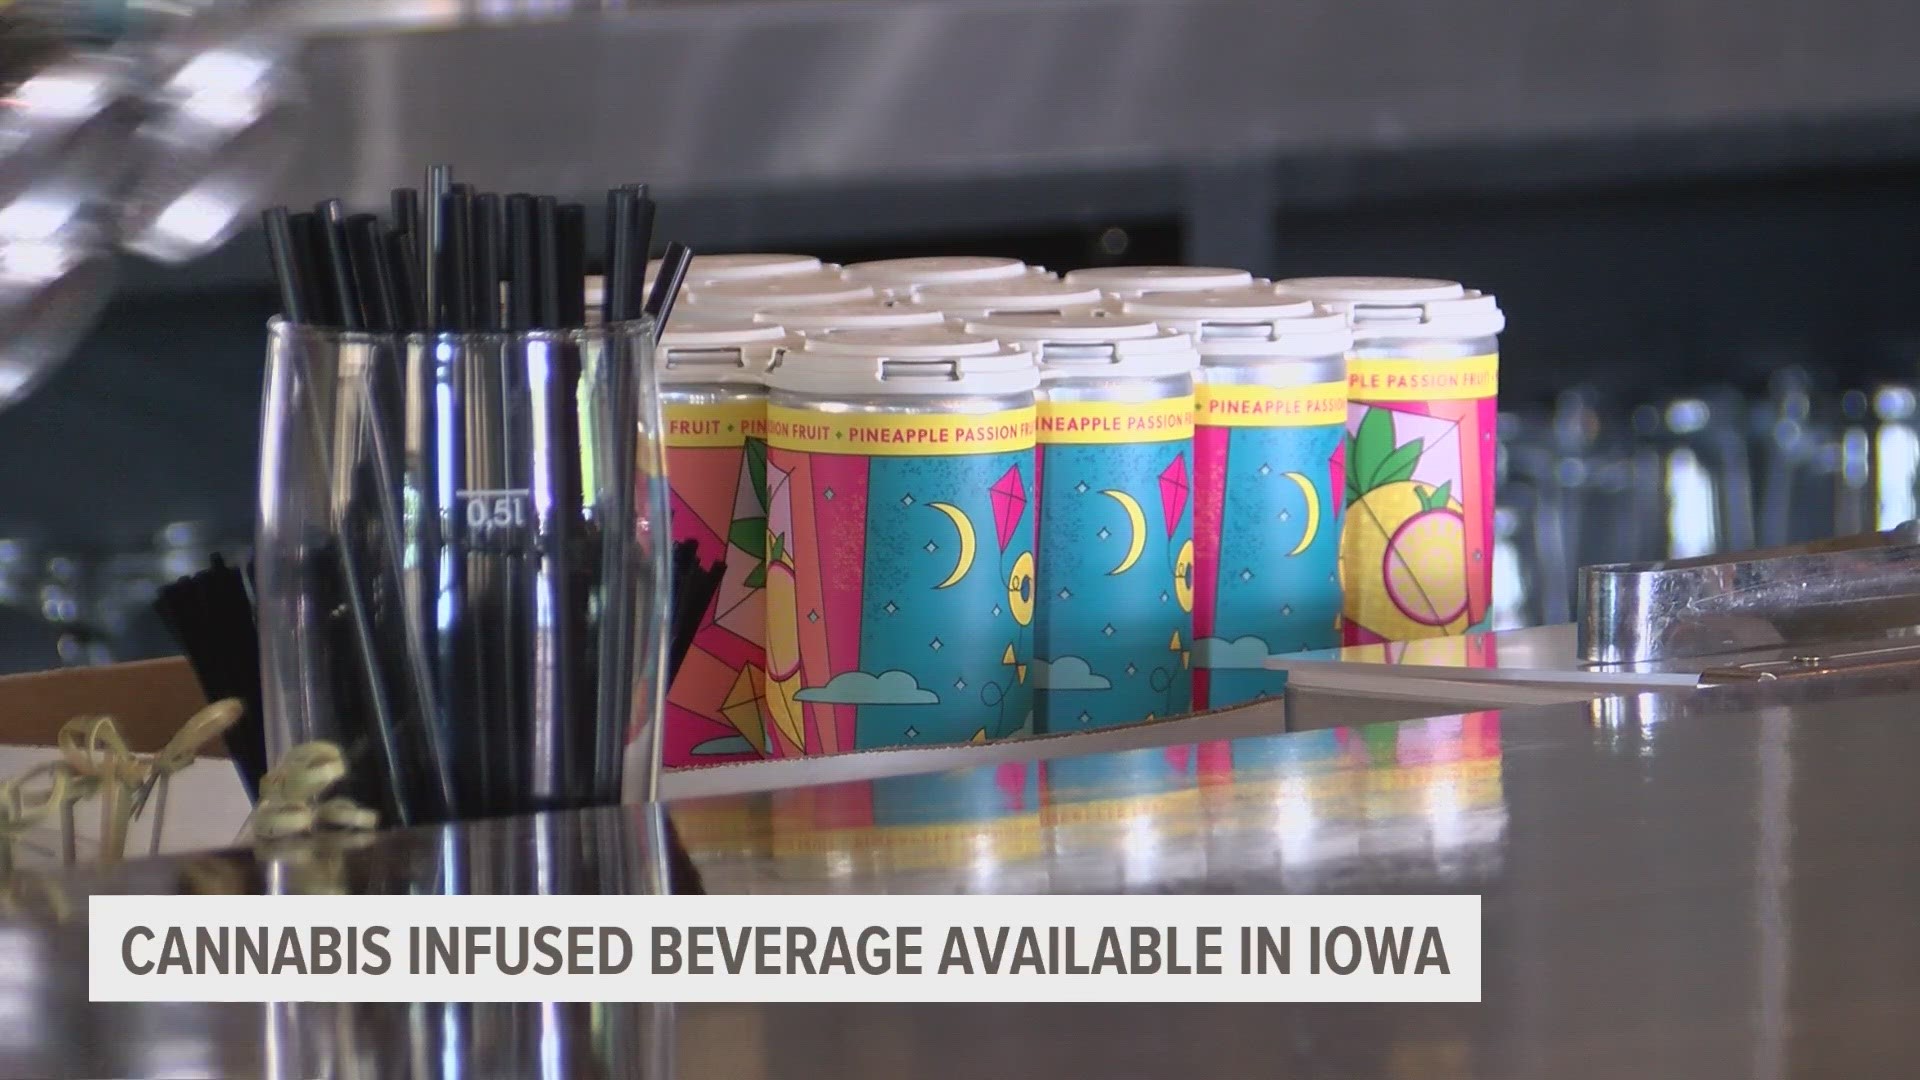 Even though recreational marijuana is not legal in Iowa, Lua Brewing was able to release "Climbing Kites," which they say is an "alcohol-free social beverage."